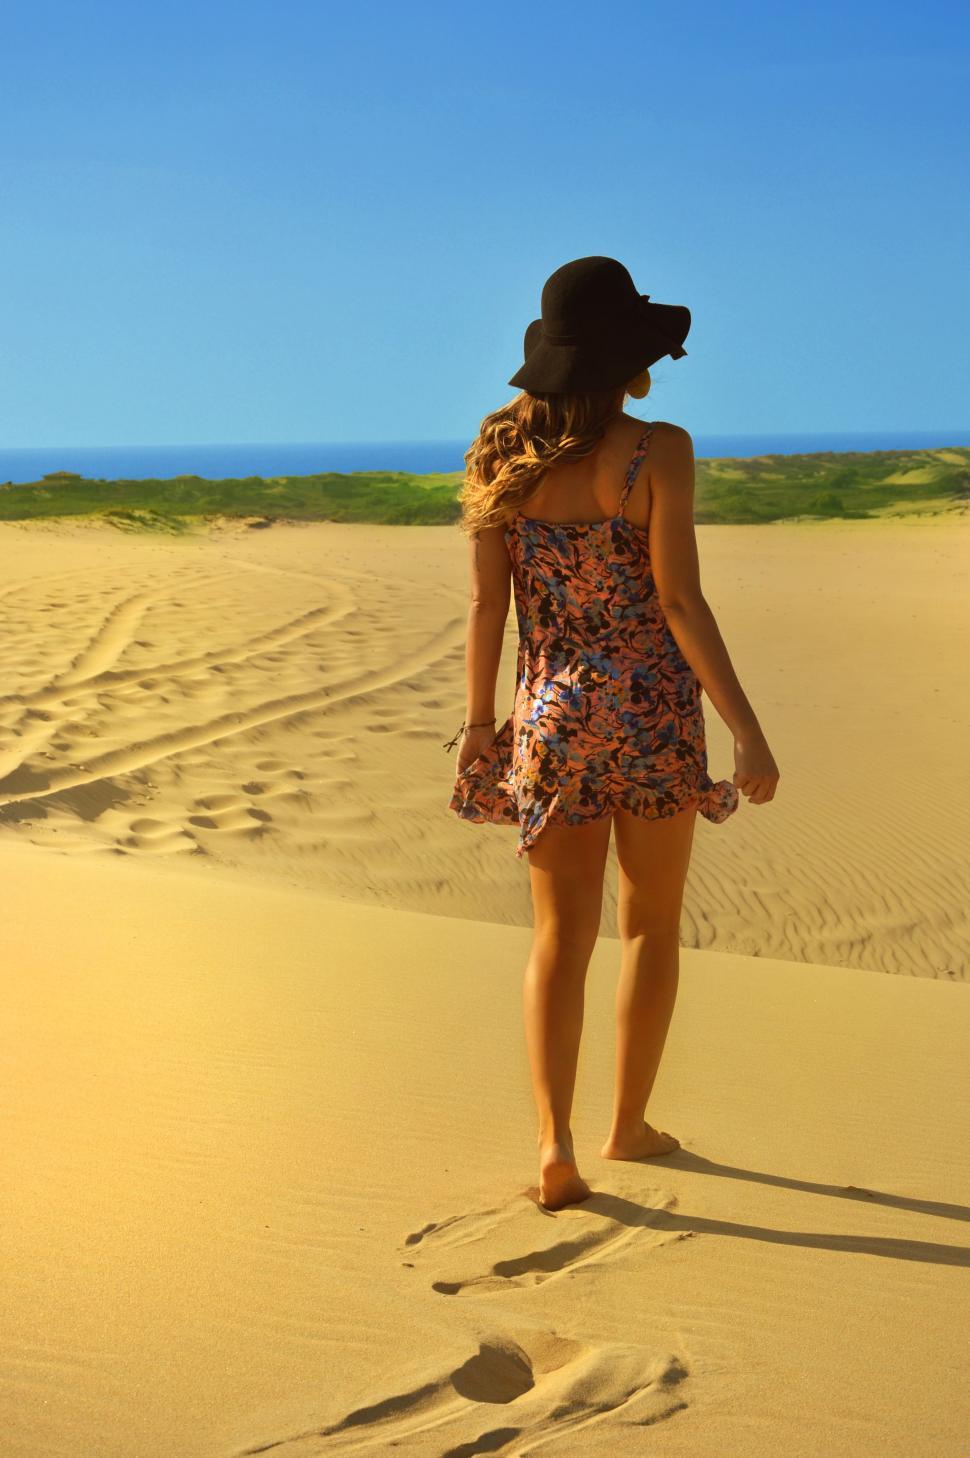 Free Image of Woman in Desert  